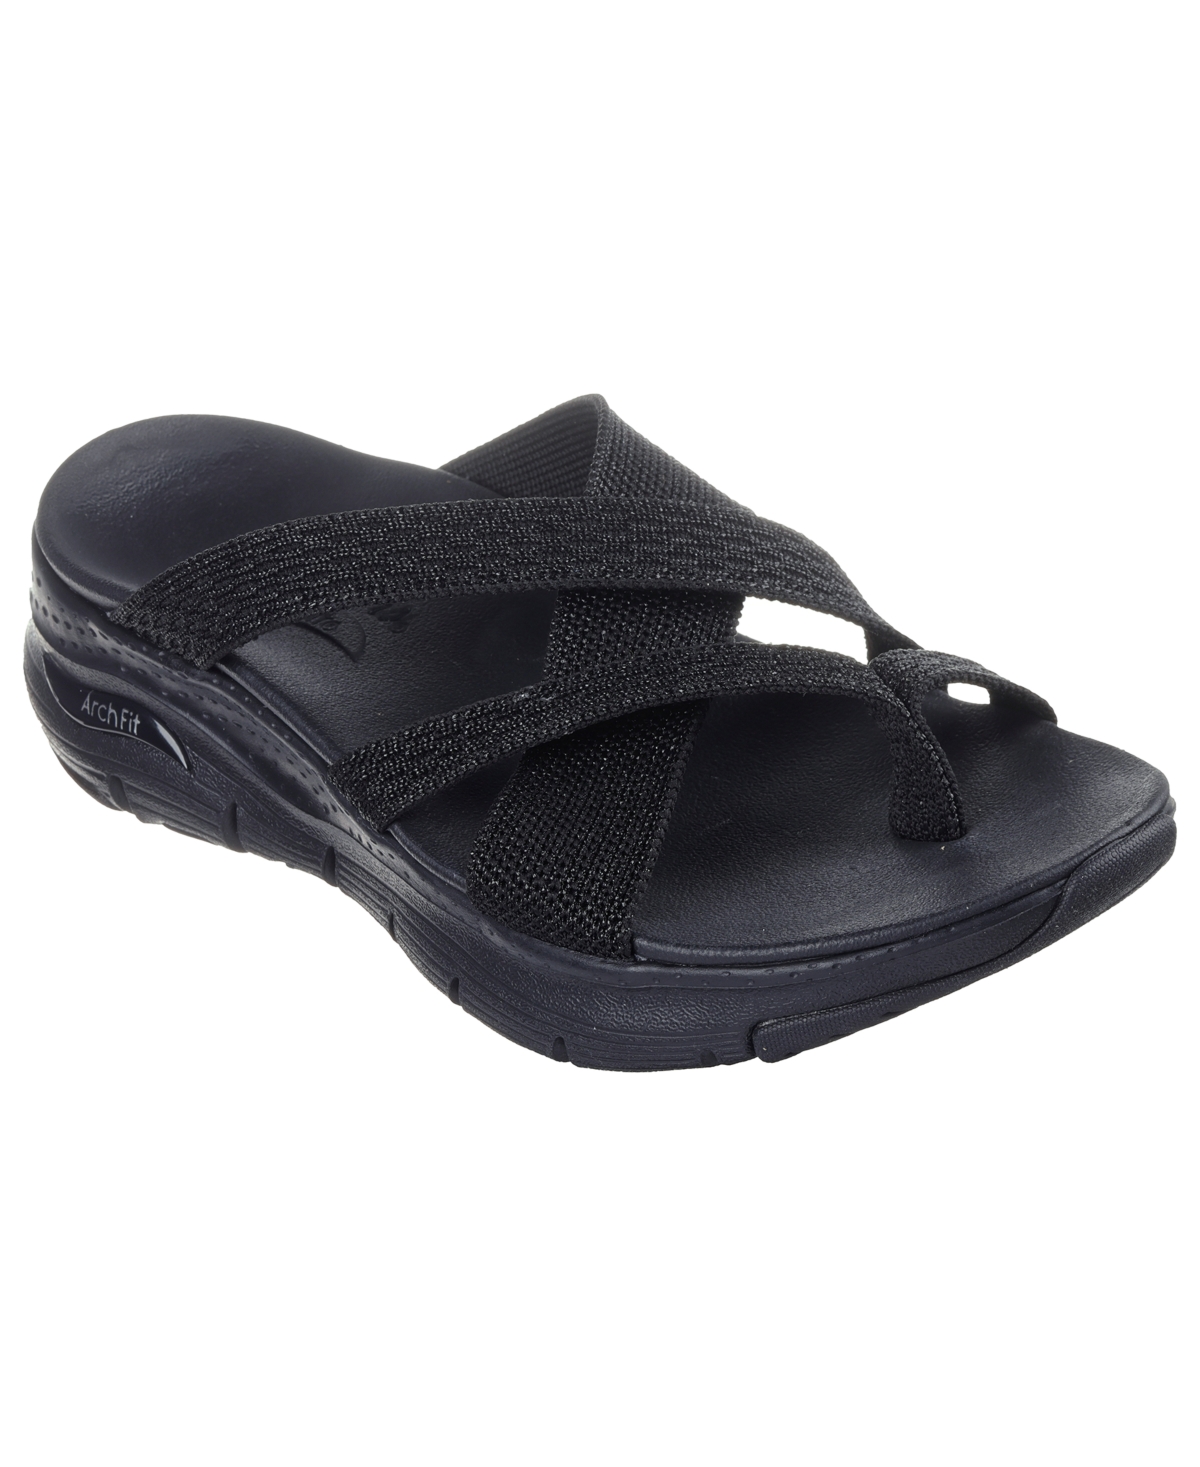 Skechers Women's Cali Arch Fit Flip-flop Thong Sandals From Finish Line In Black